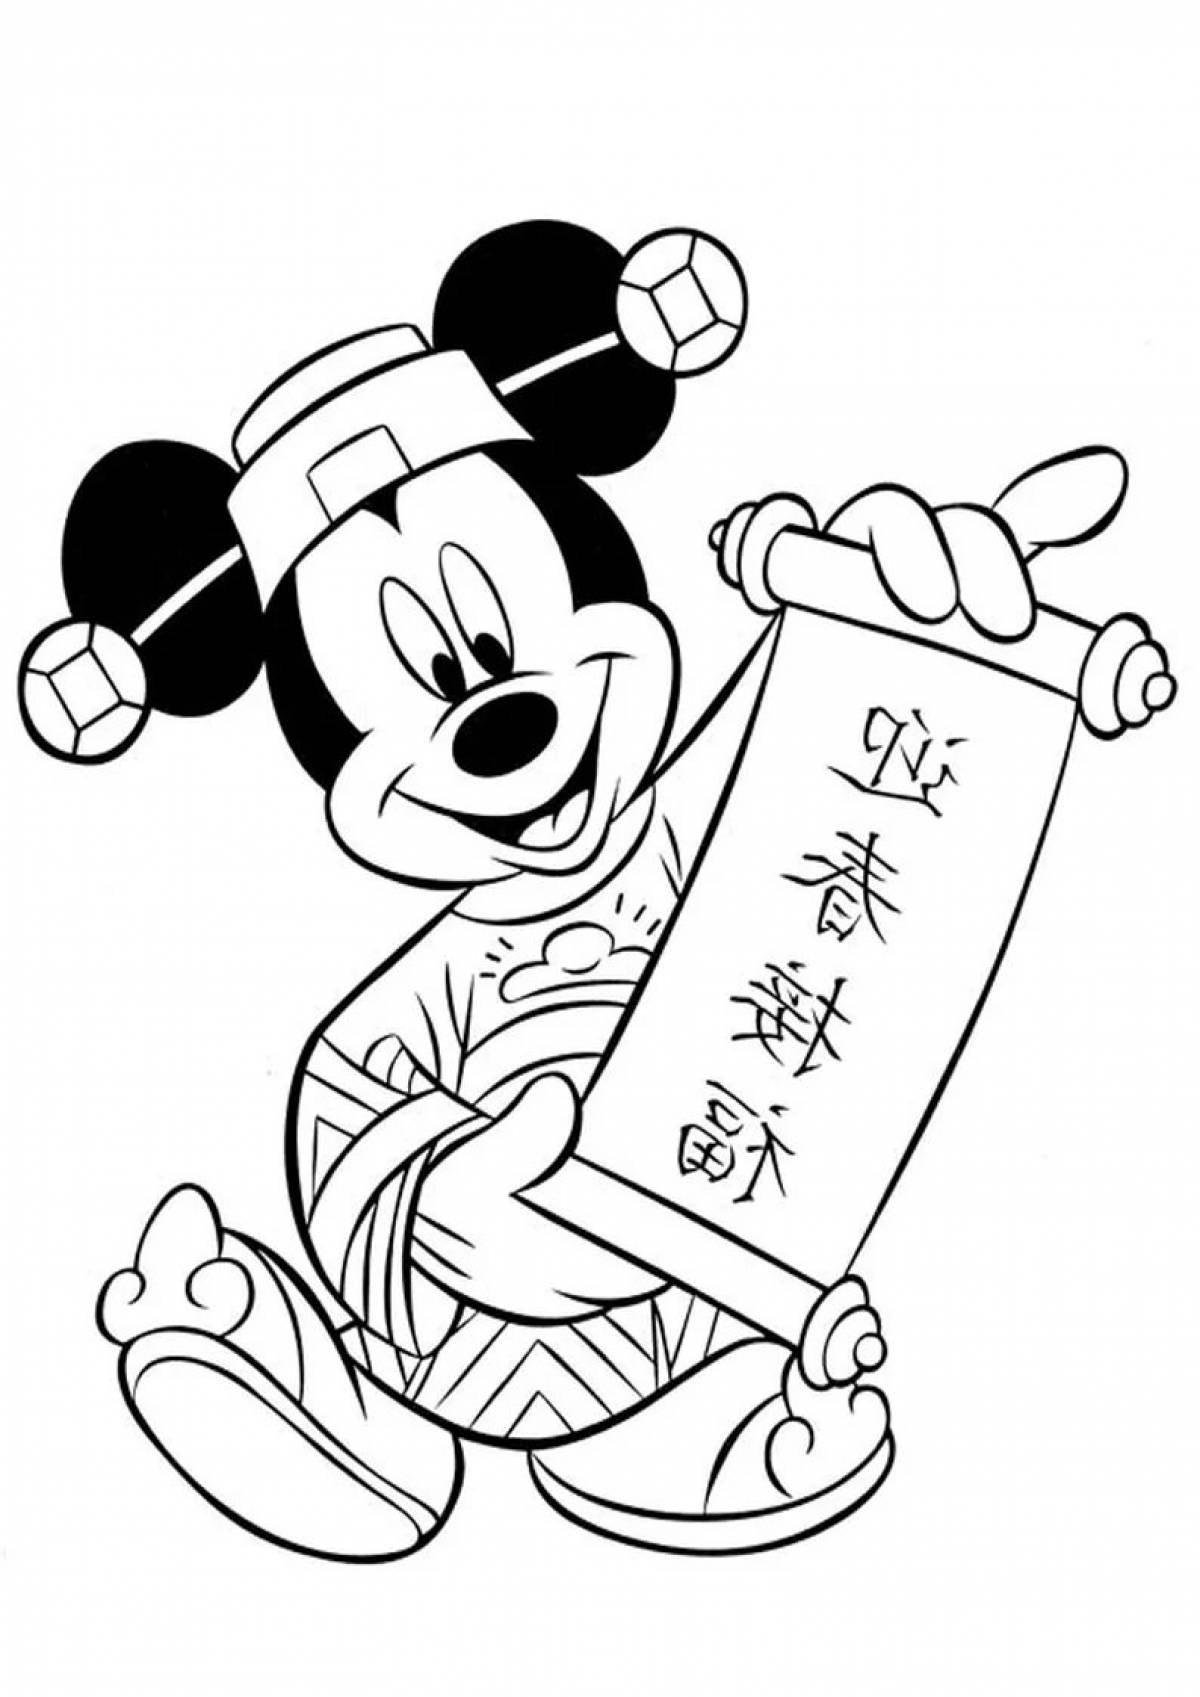 Stylish Chinese coloring book